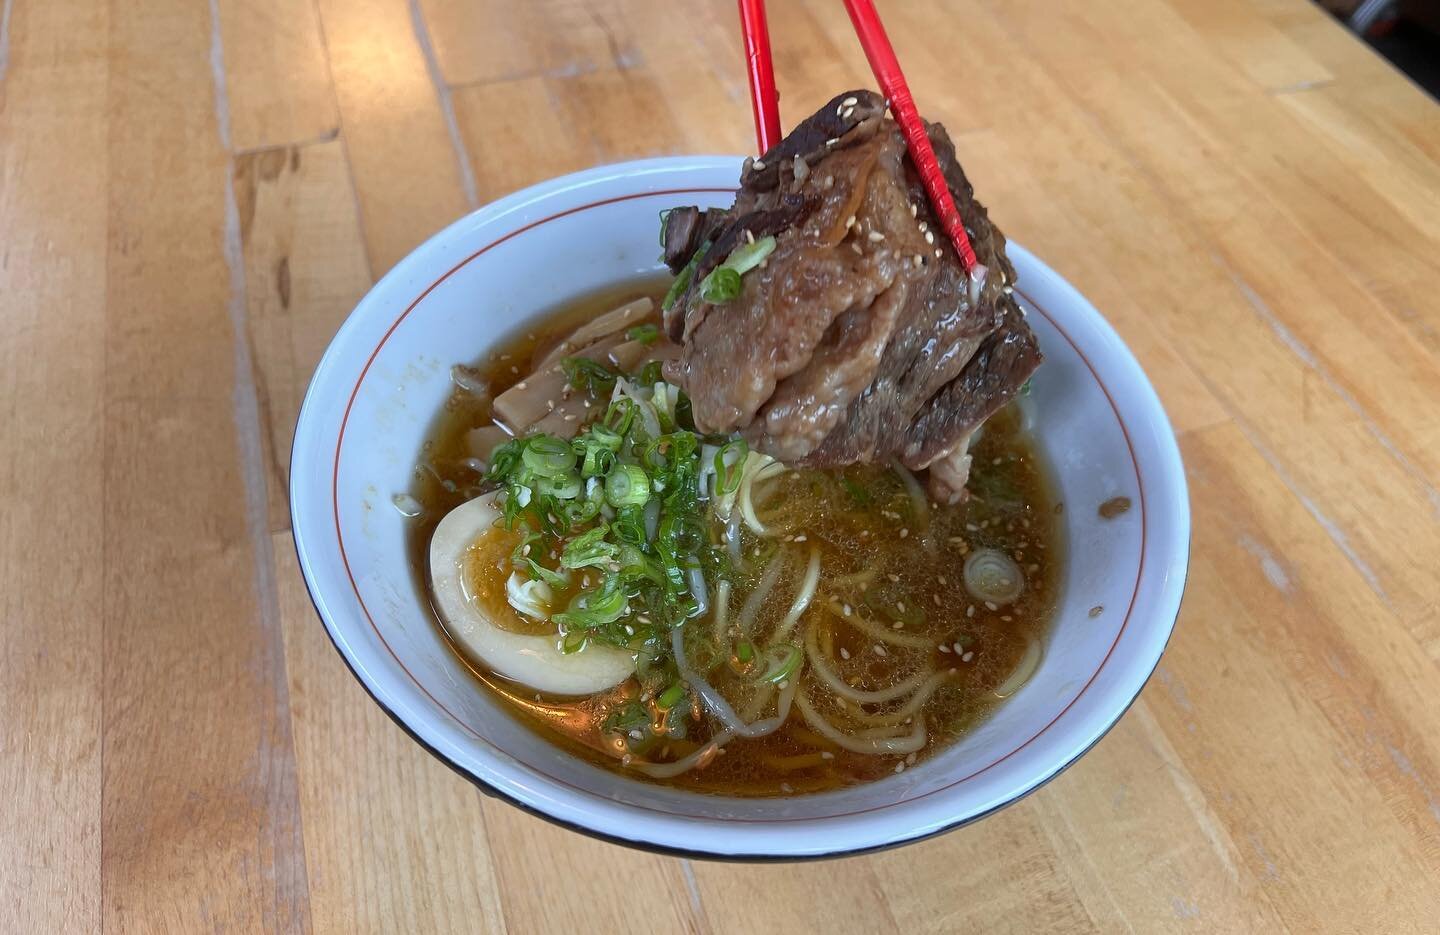 🍜 Our new Wagyu Ramen starting today. Now serving our Wagyu ramen with Beef Brisket!!